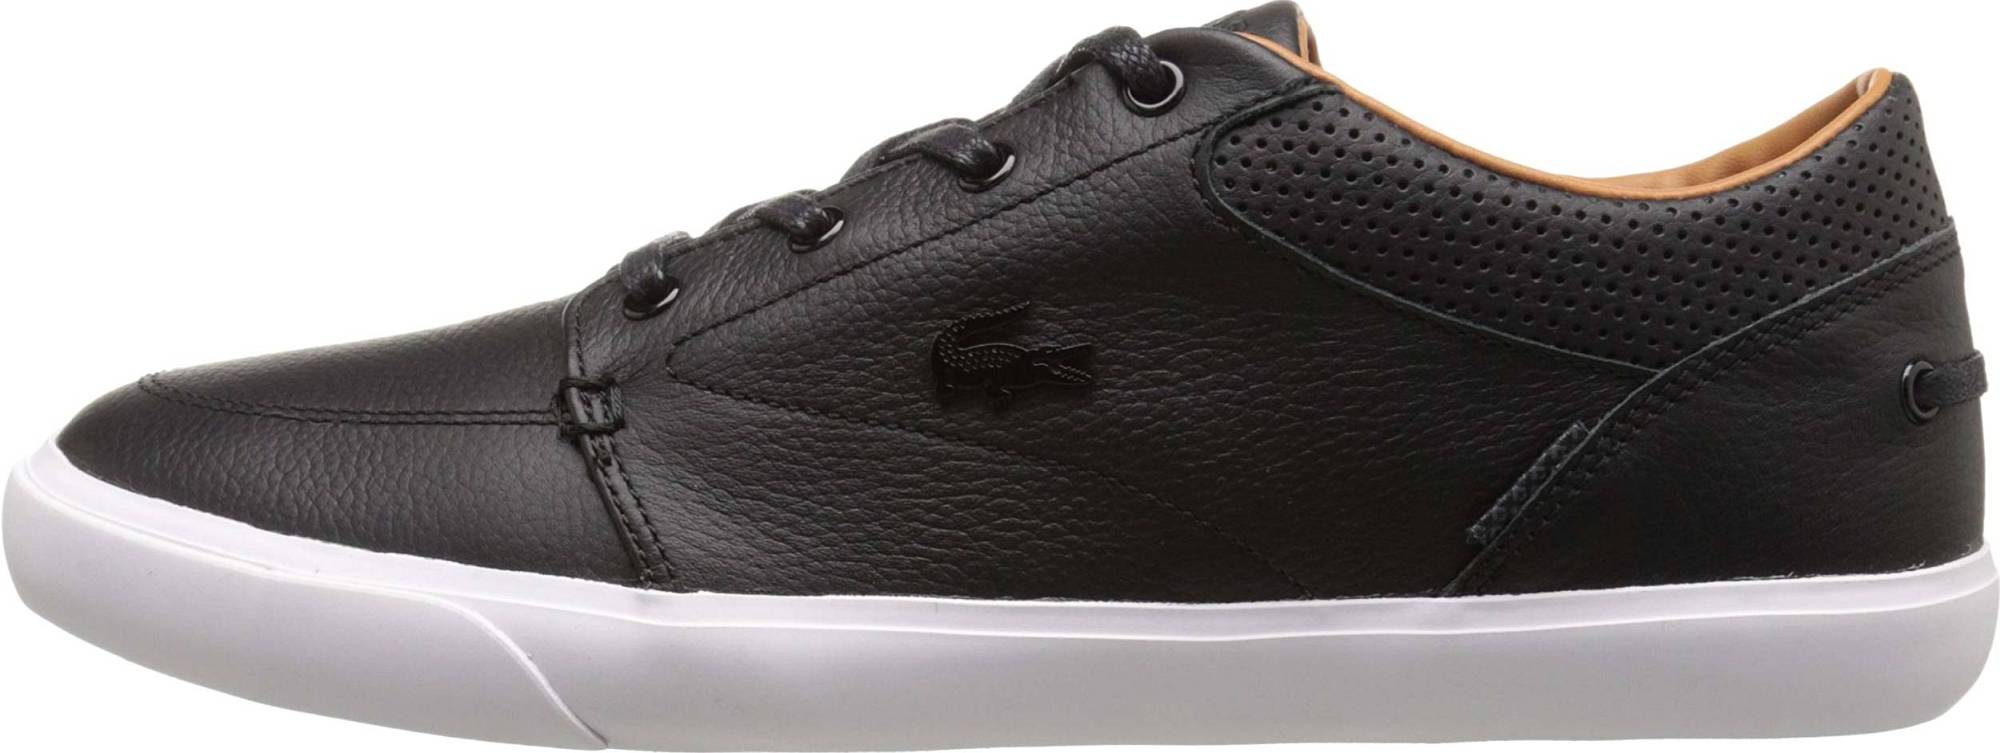 Lacoste Bayliss Vulc PRM – Shoes Reviews & Reasons To Buy